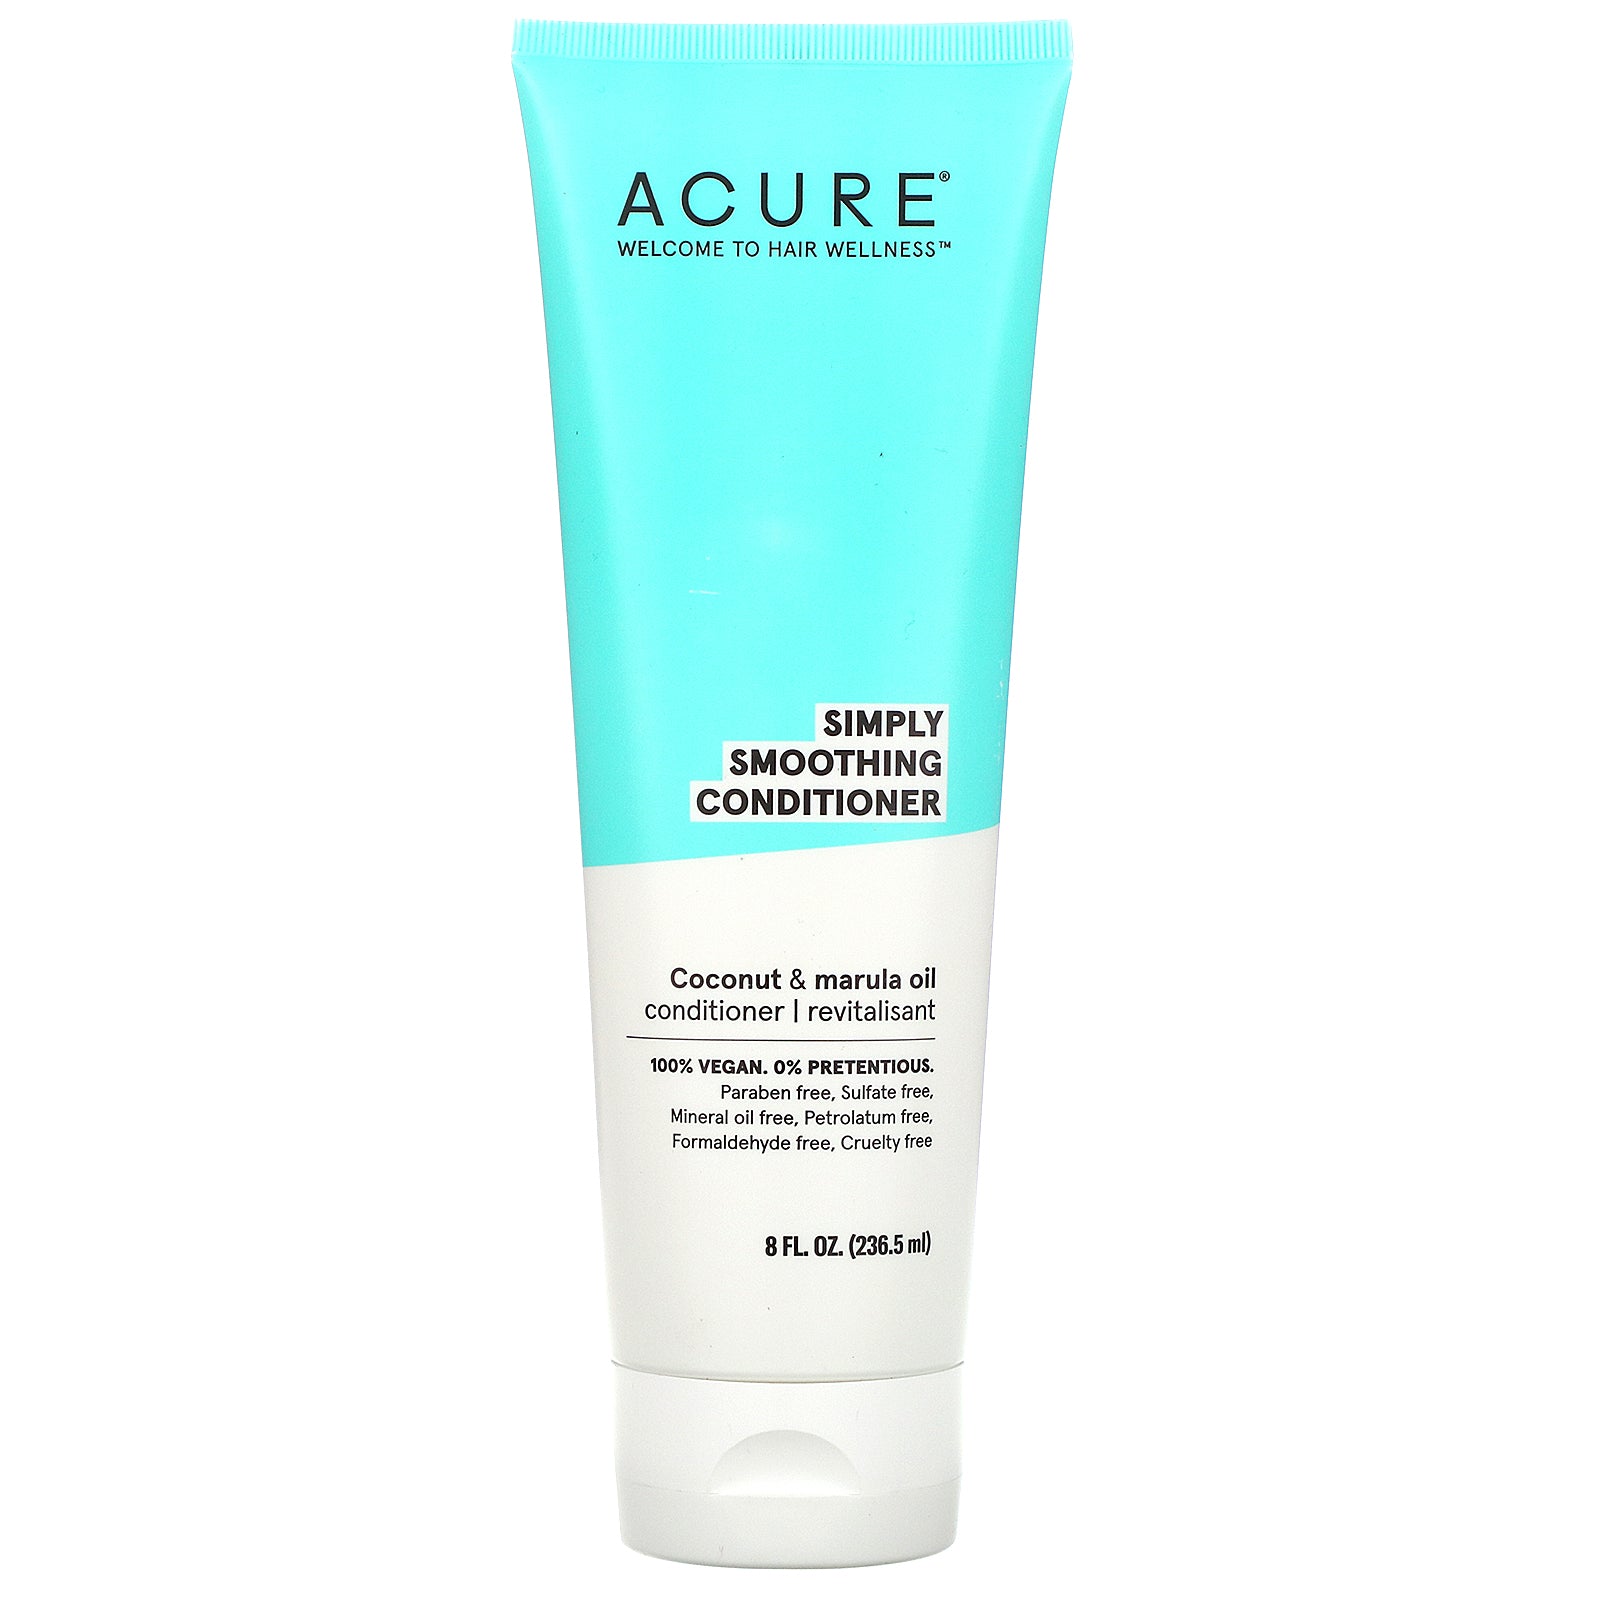 Acure, Simply Smoothing Conditioner, Coconut & Marula Oil,  8 fl oz (236.5 ml)